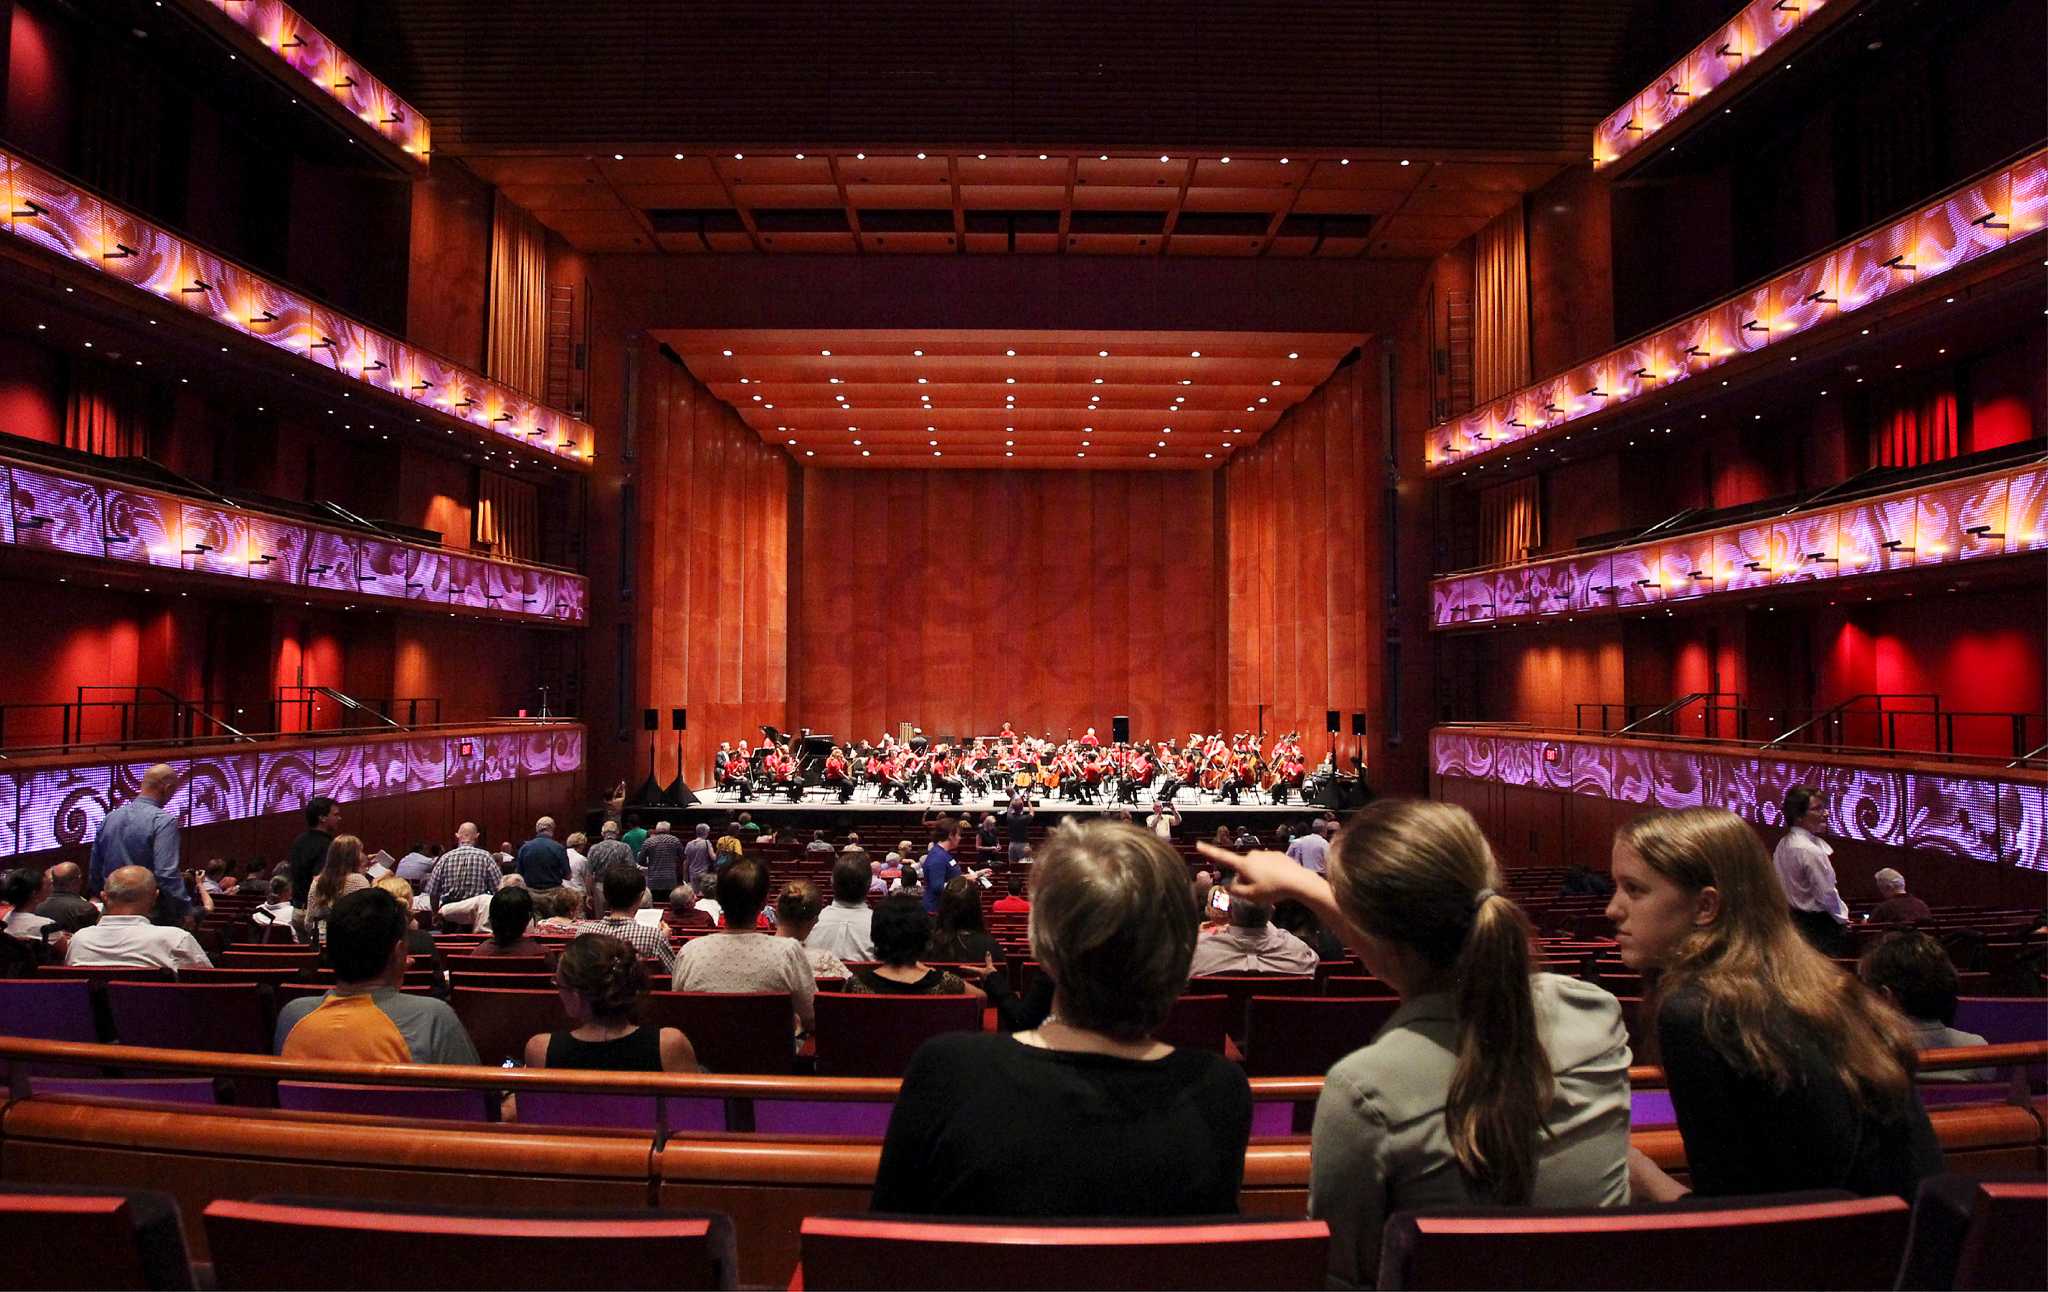 Tobin Center's acoustics to rank with the best